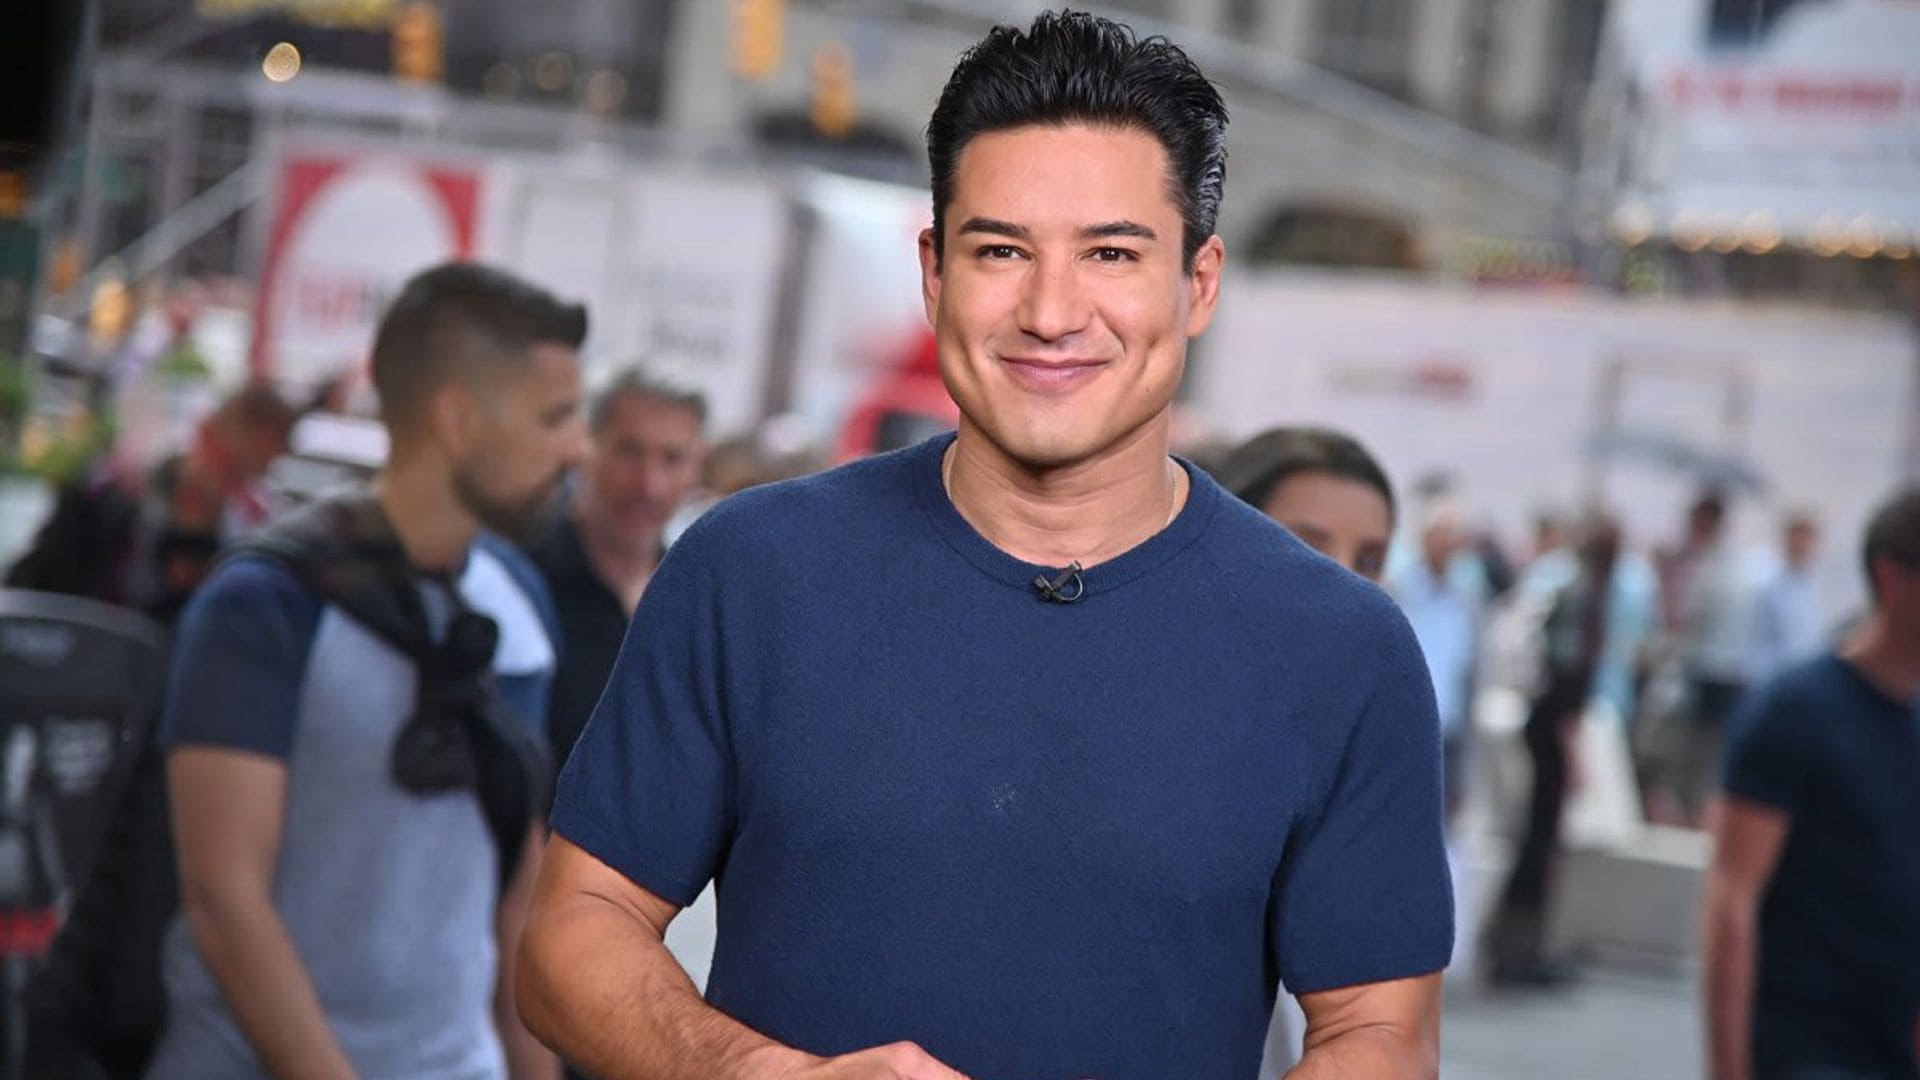 Mario Lopez talks about his busy year and why he loves breakfast time with his family so much